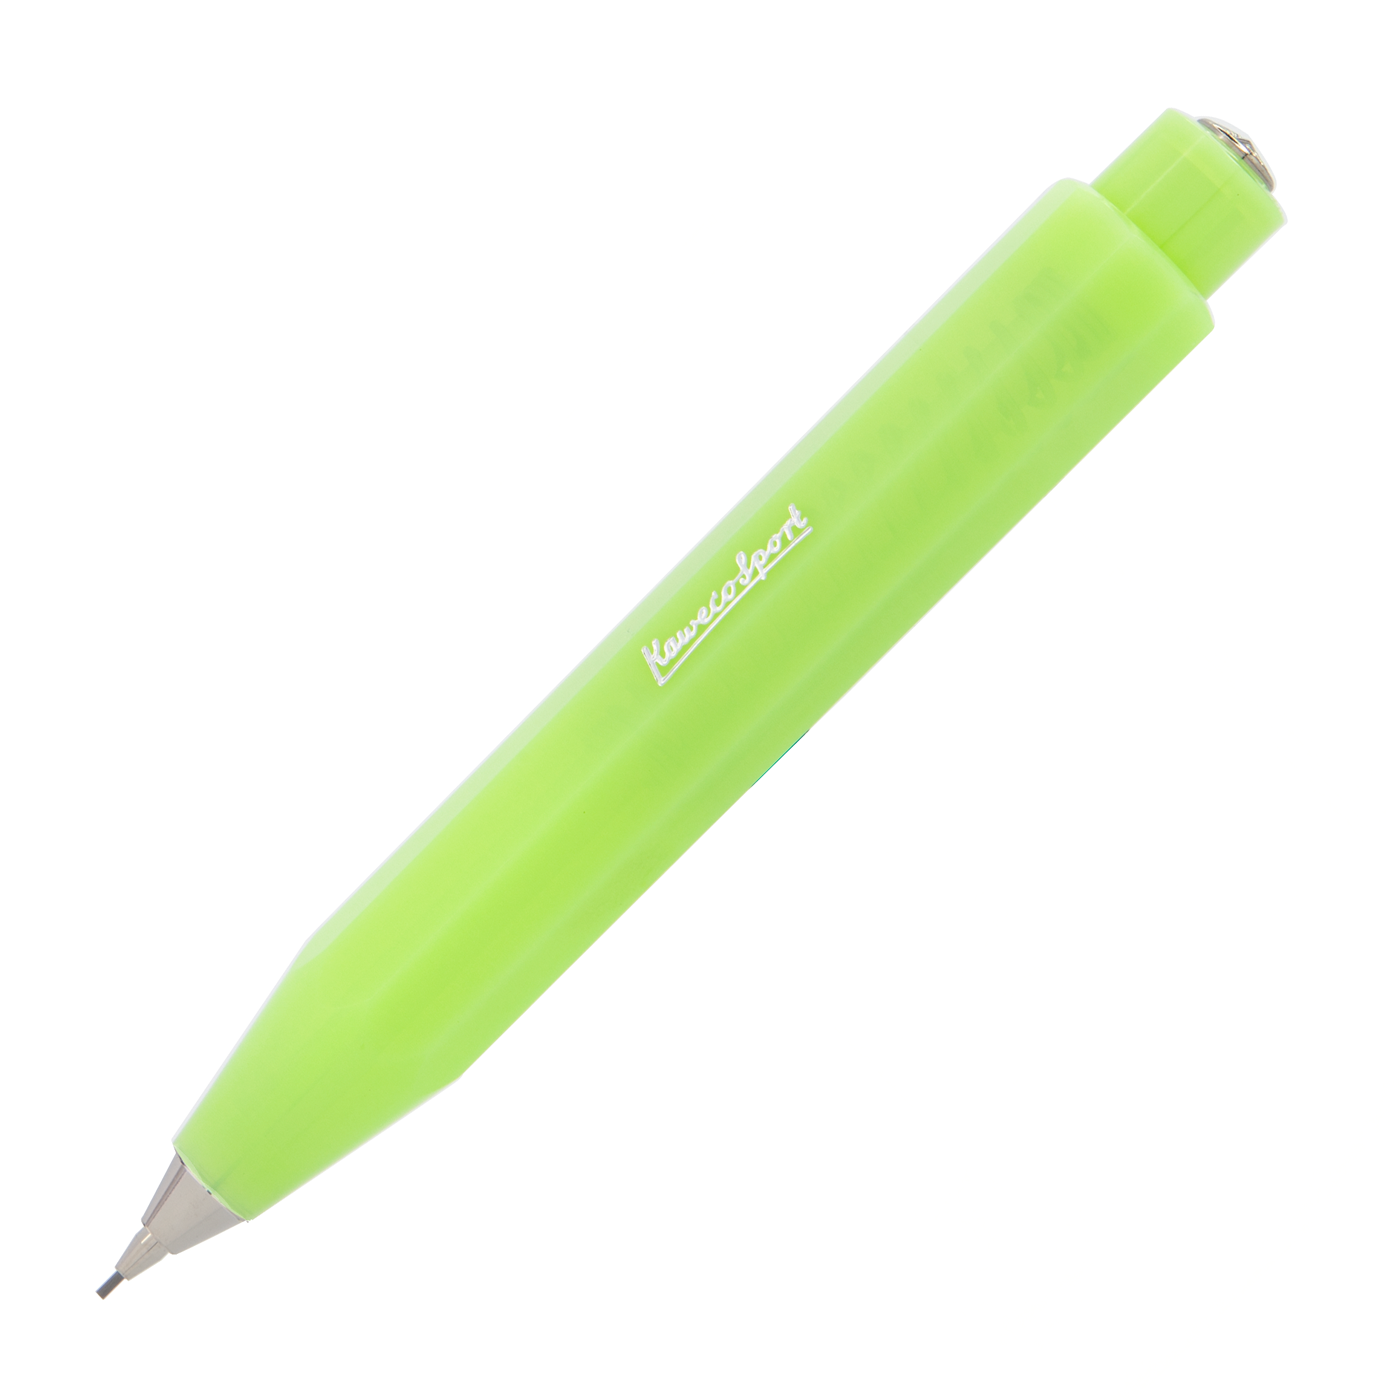 Kaweco Frosted Lime 0.7mm Pencil